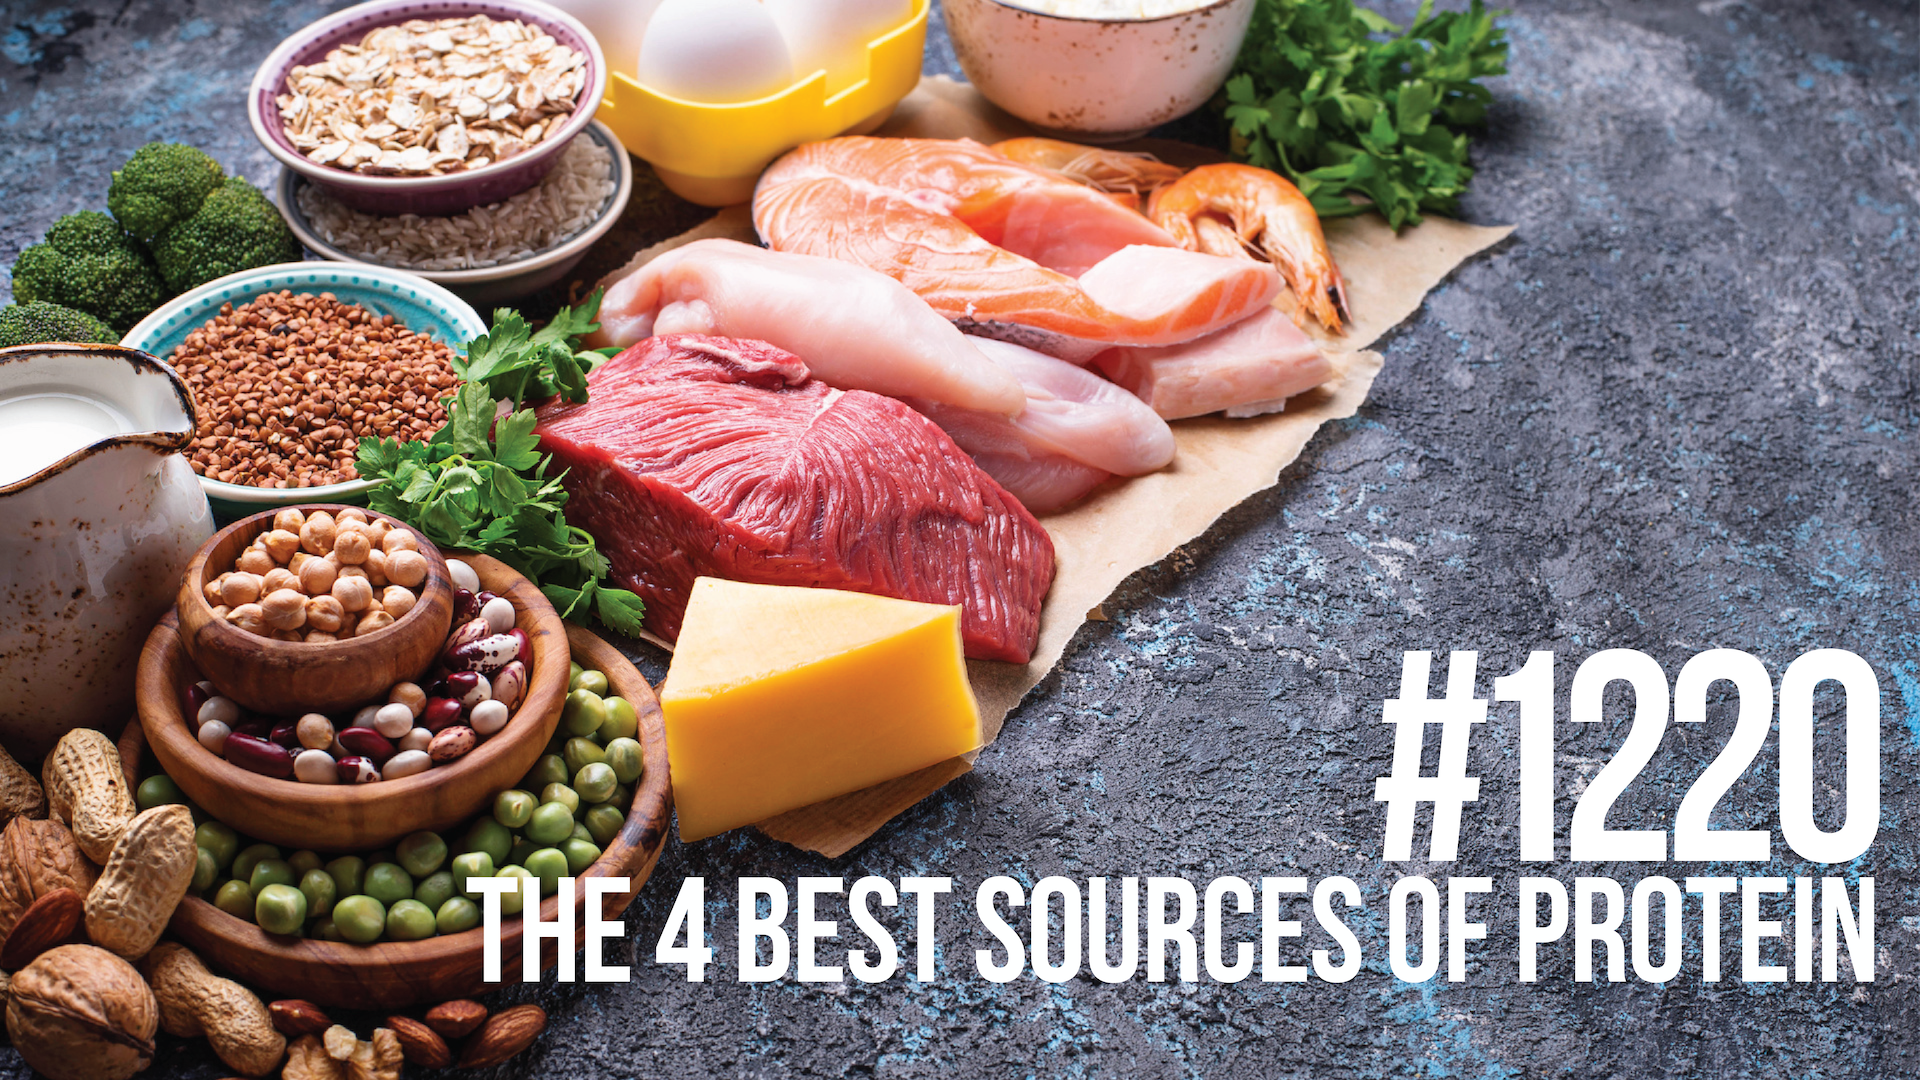 1220: The 4 Best Sources of Protein